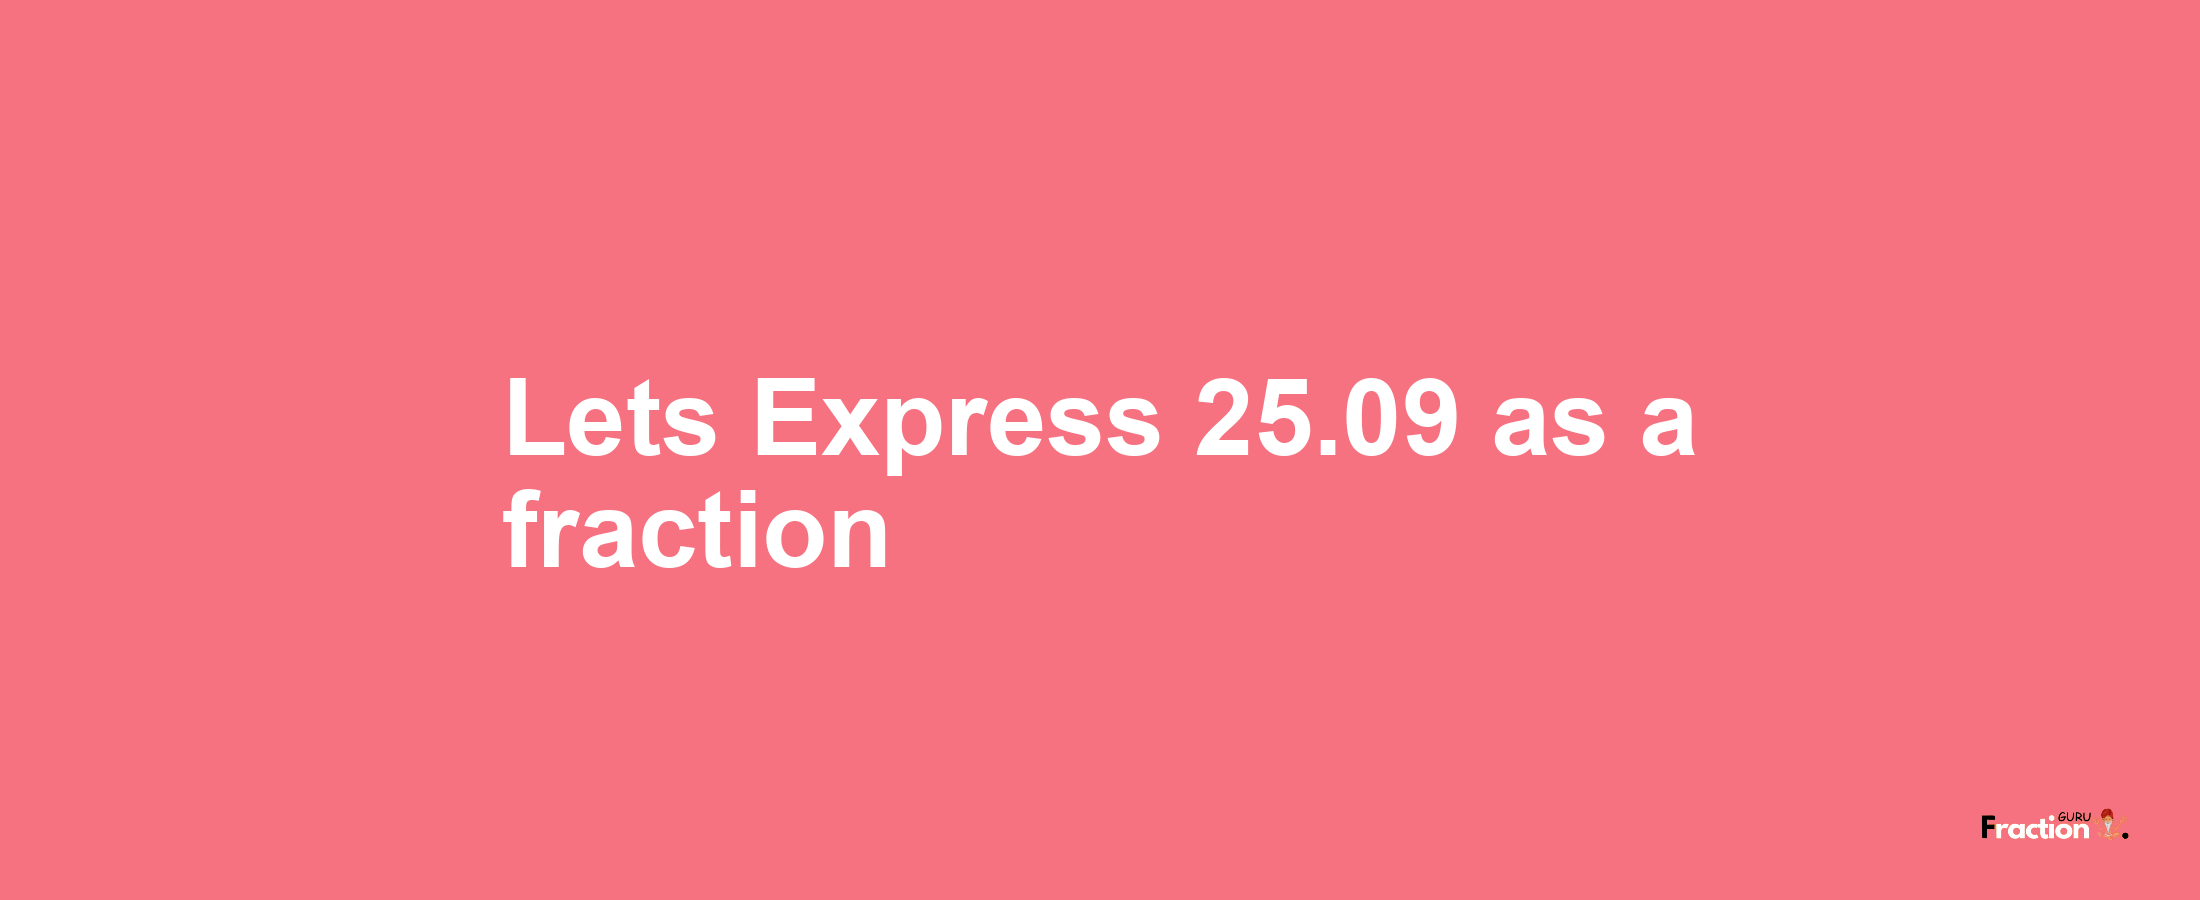 Lets Express 25.09 as afraction